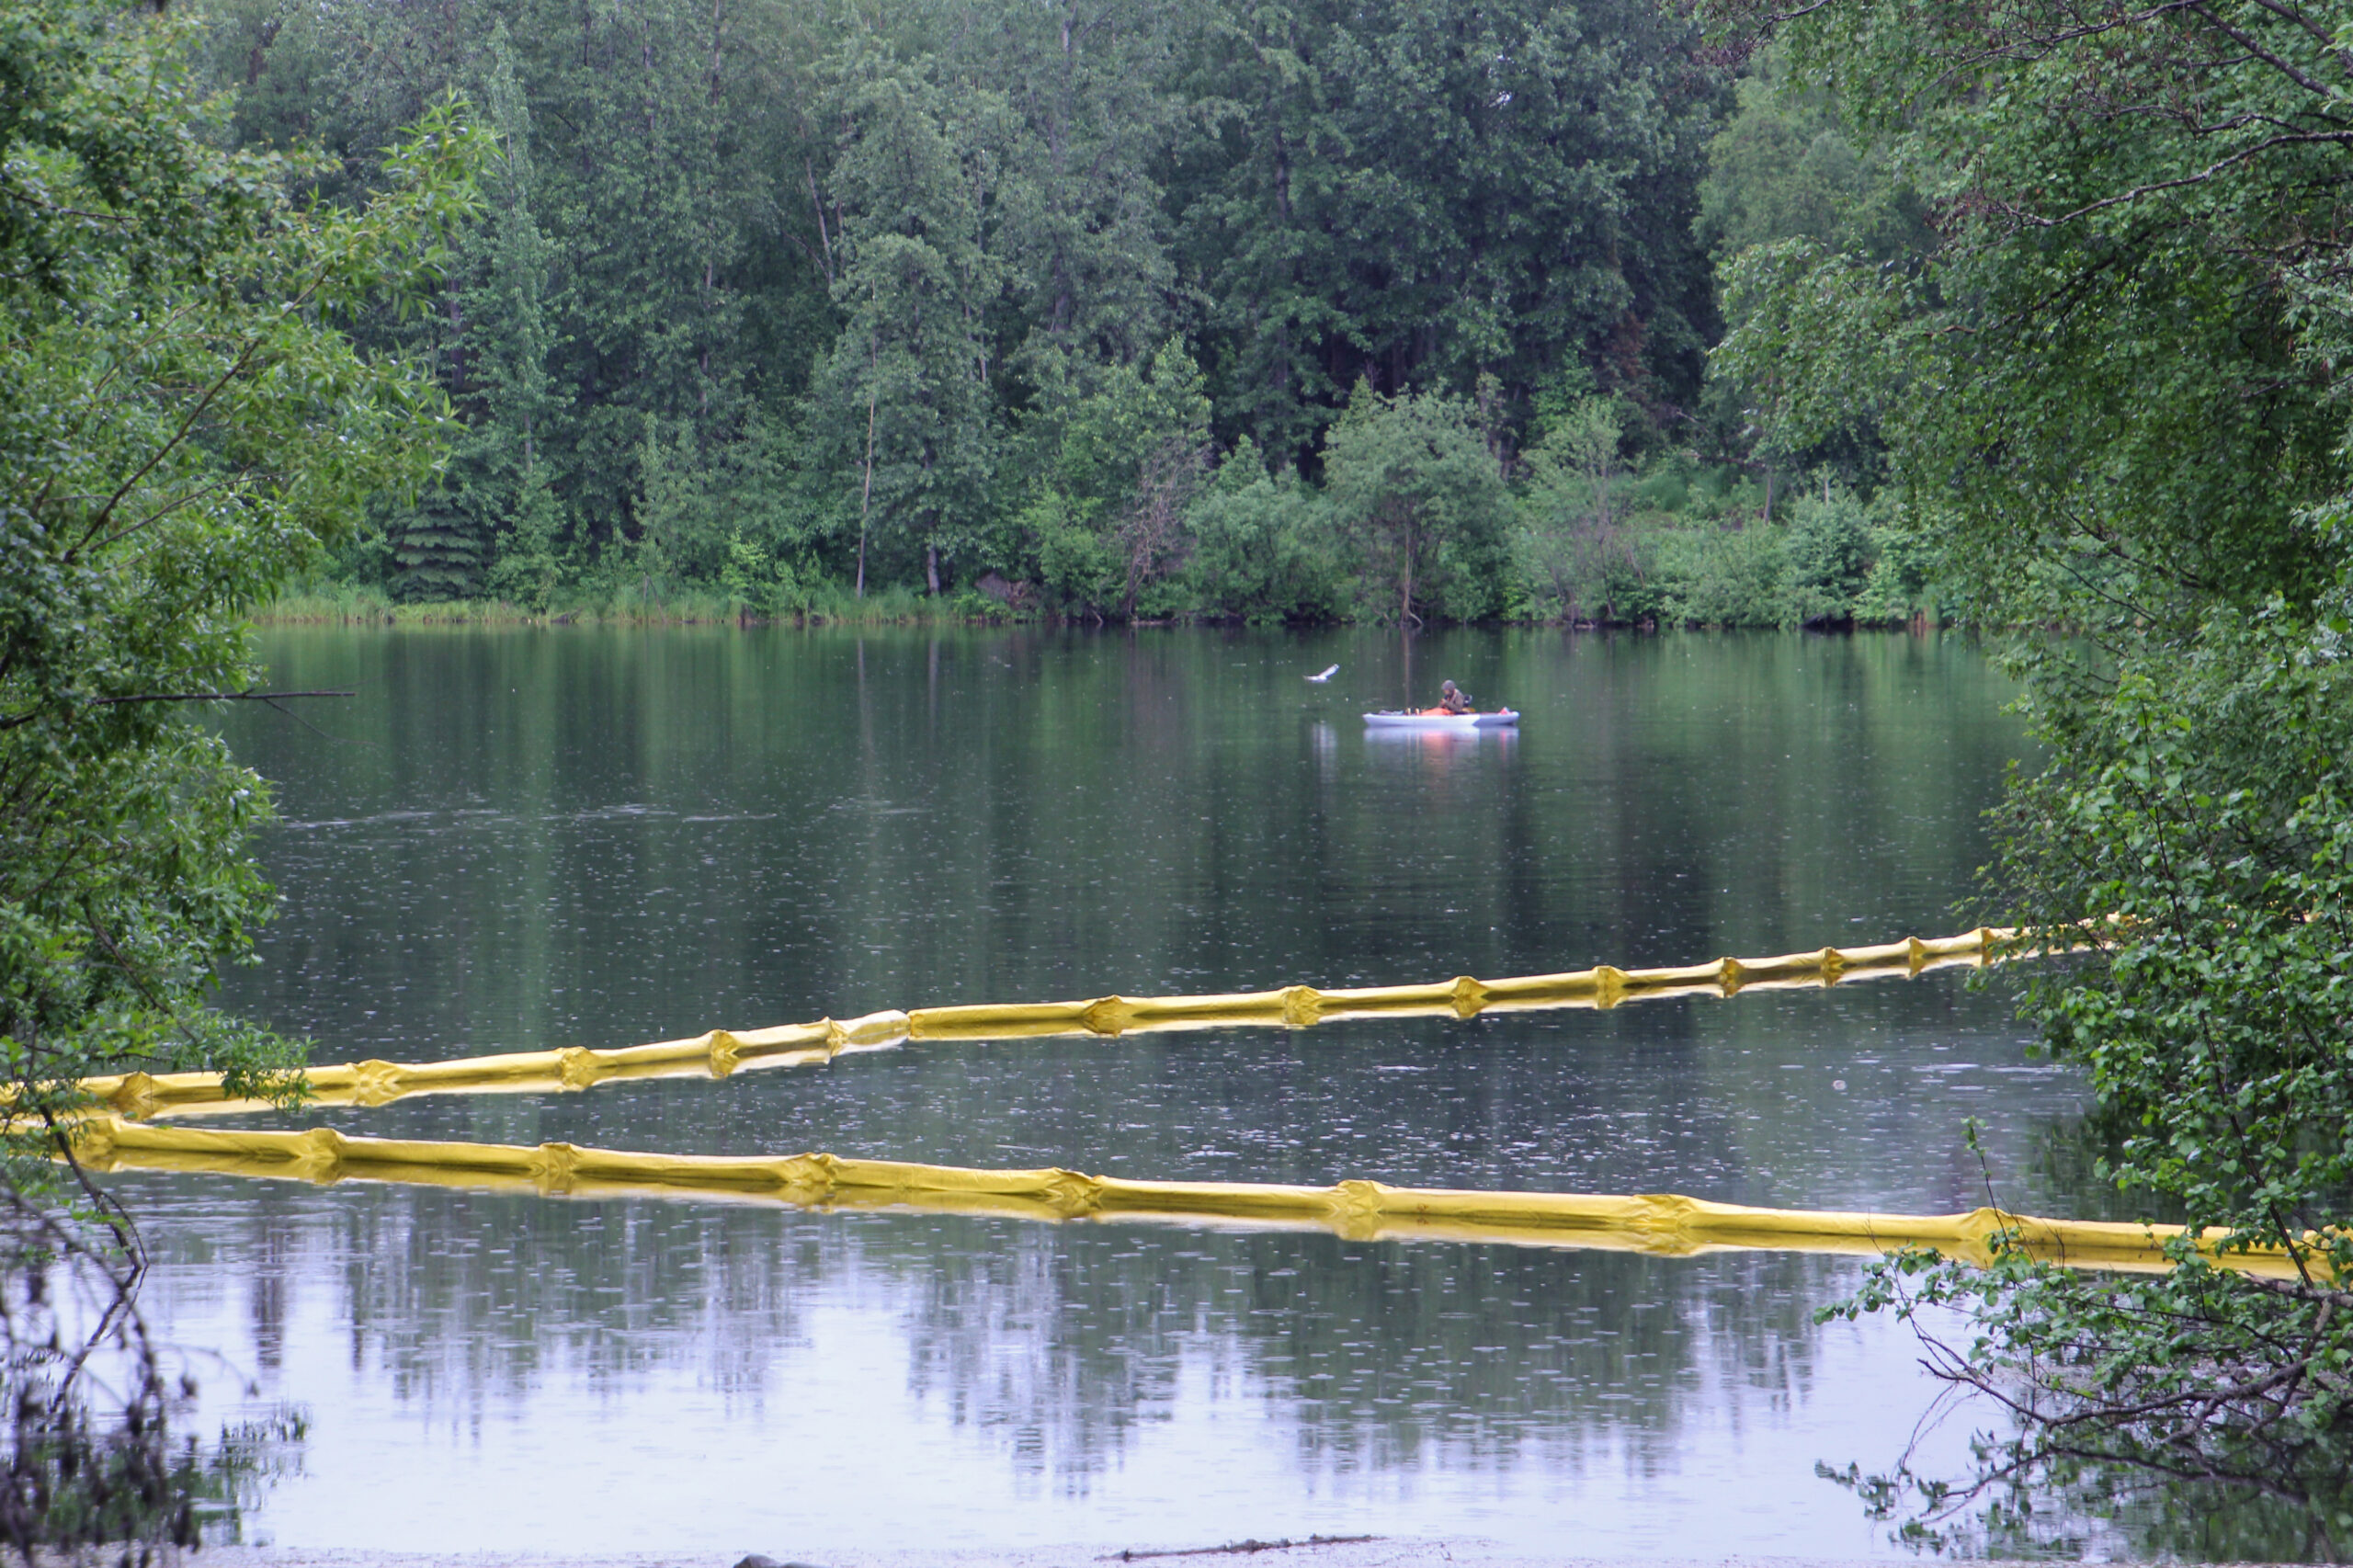 a man in a kayak on a lake. a white bird flies near him. yellow floats create lines on the water.